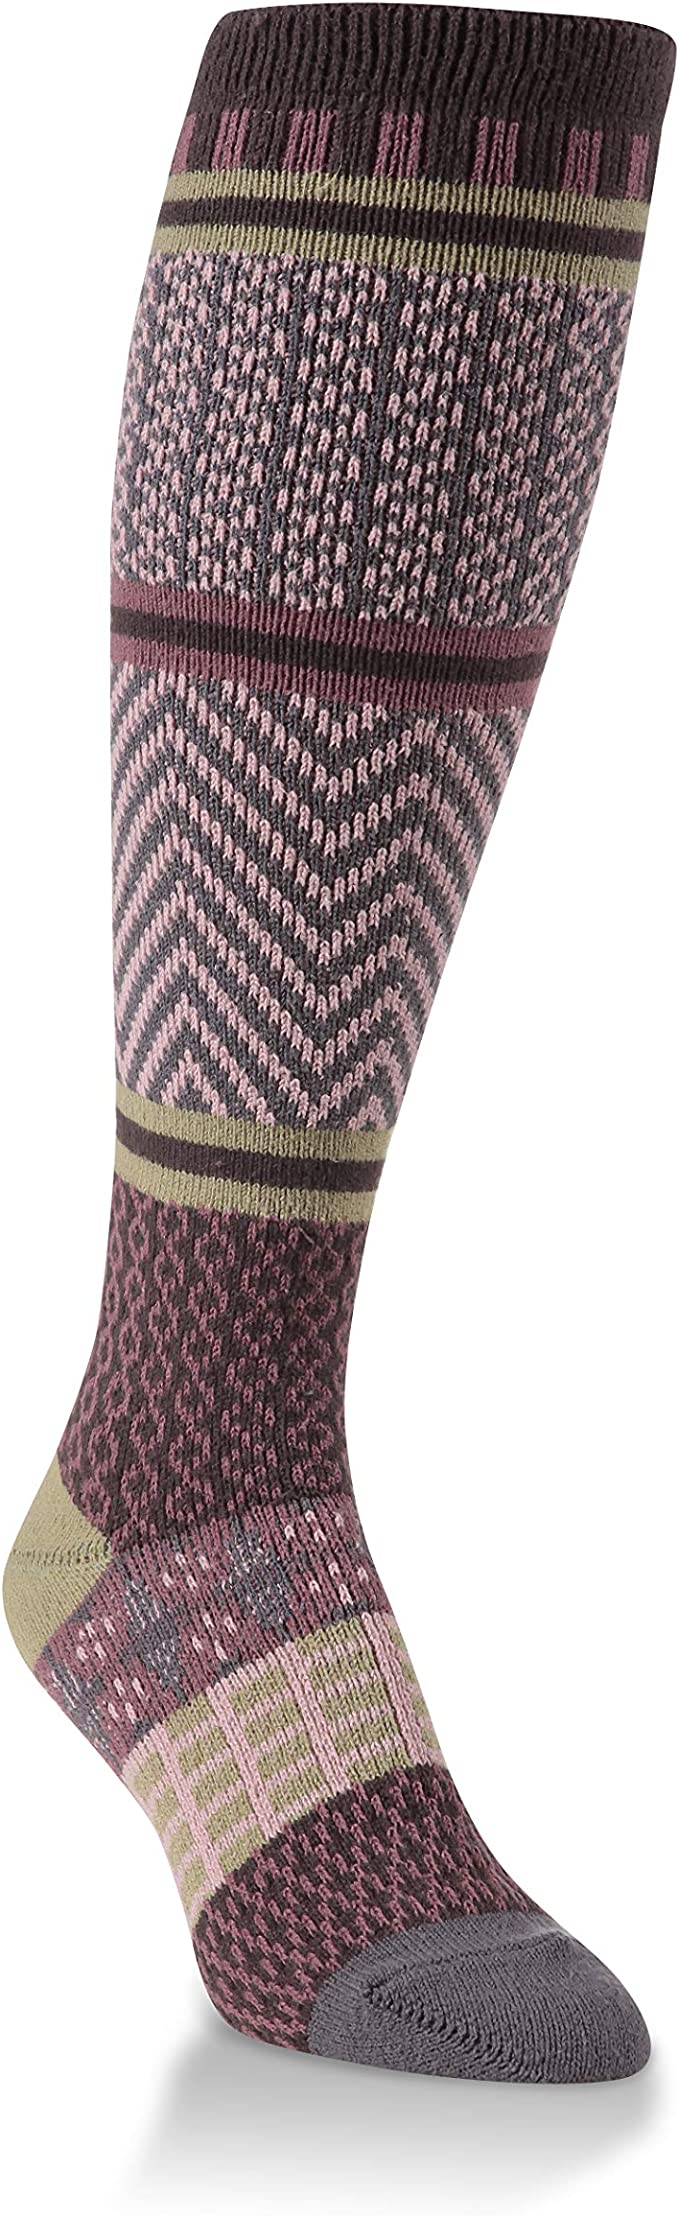 World's Softest Weekend Collection Women's One Size Knit Knee High Socks Gallery